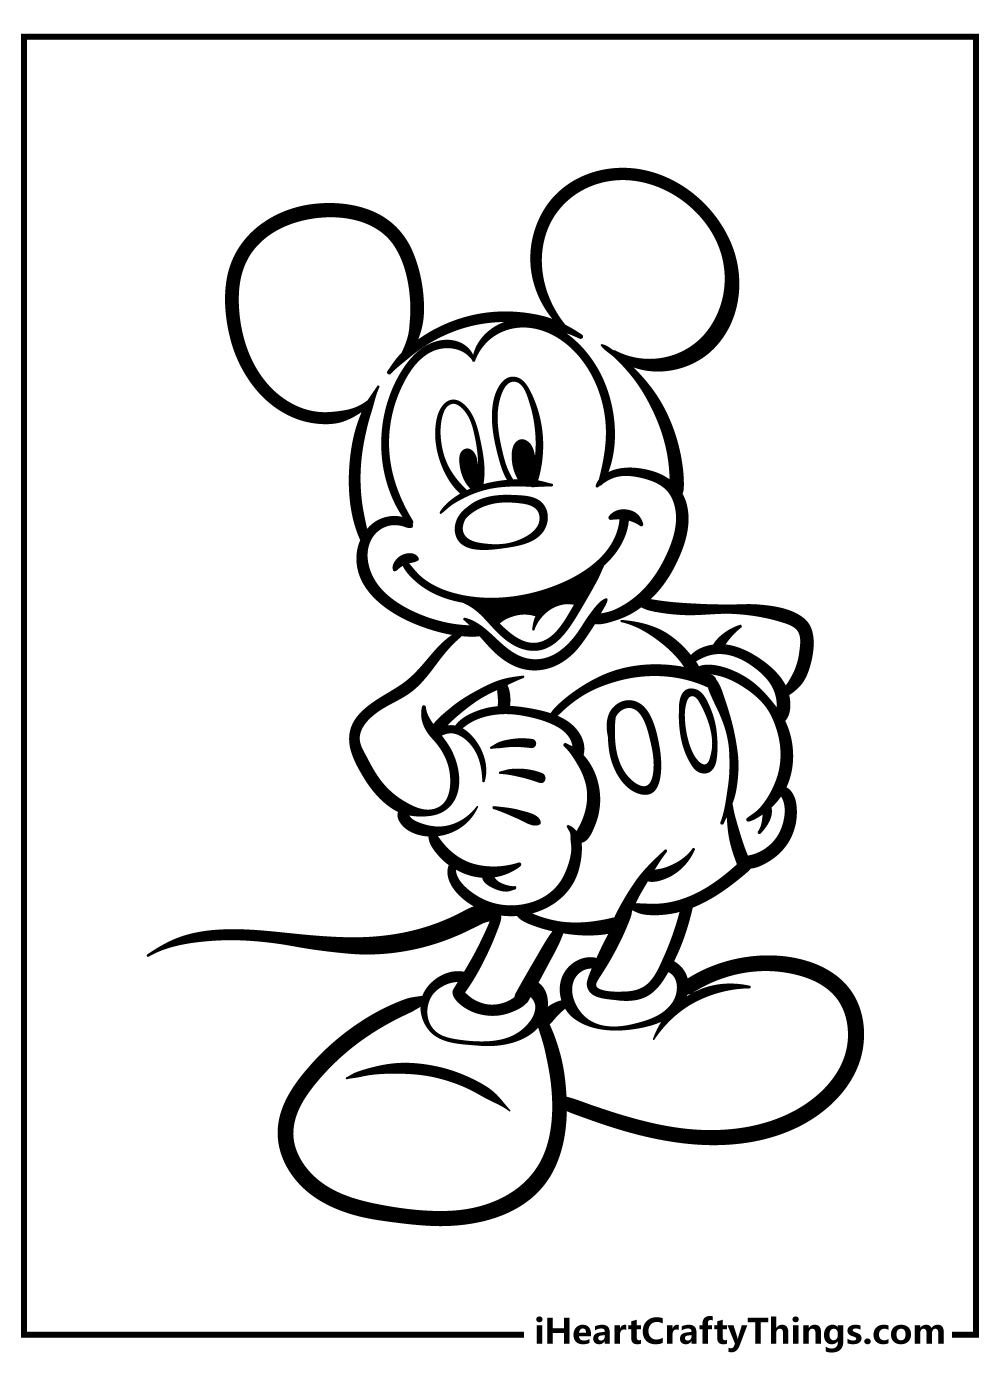 Printable Mickey Mouse Coloring Pages Updated 20